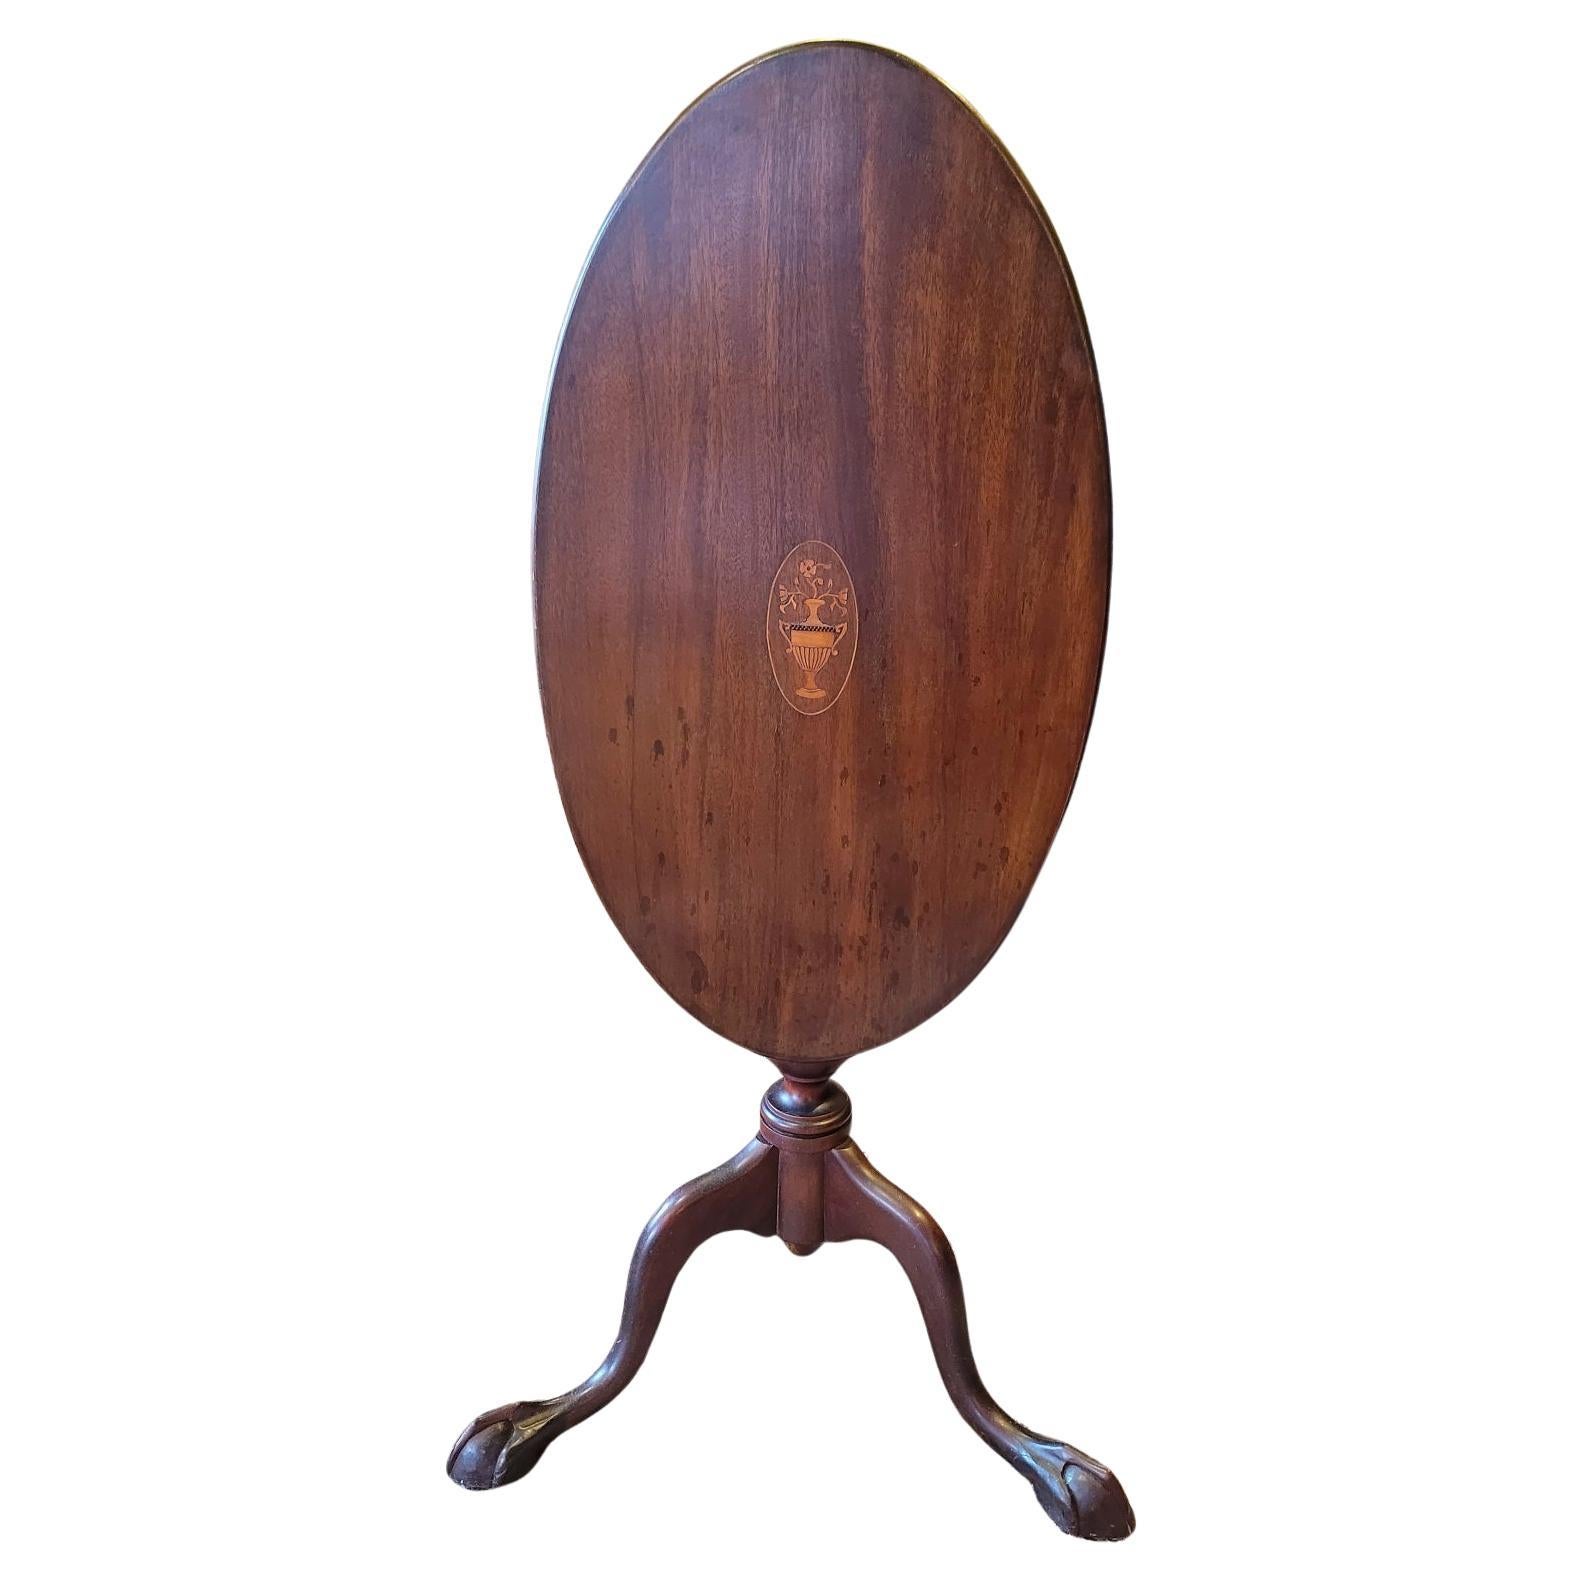 Early 20C English Oval Tilt Top Ball and Claw Side Table